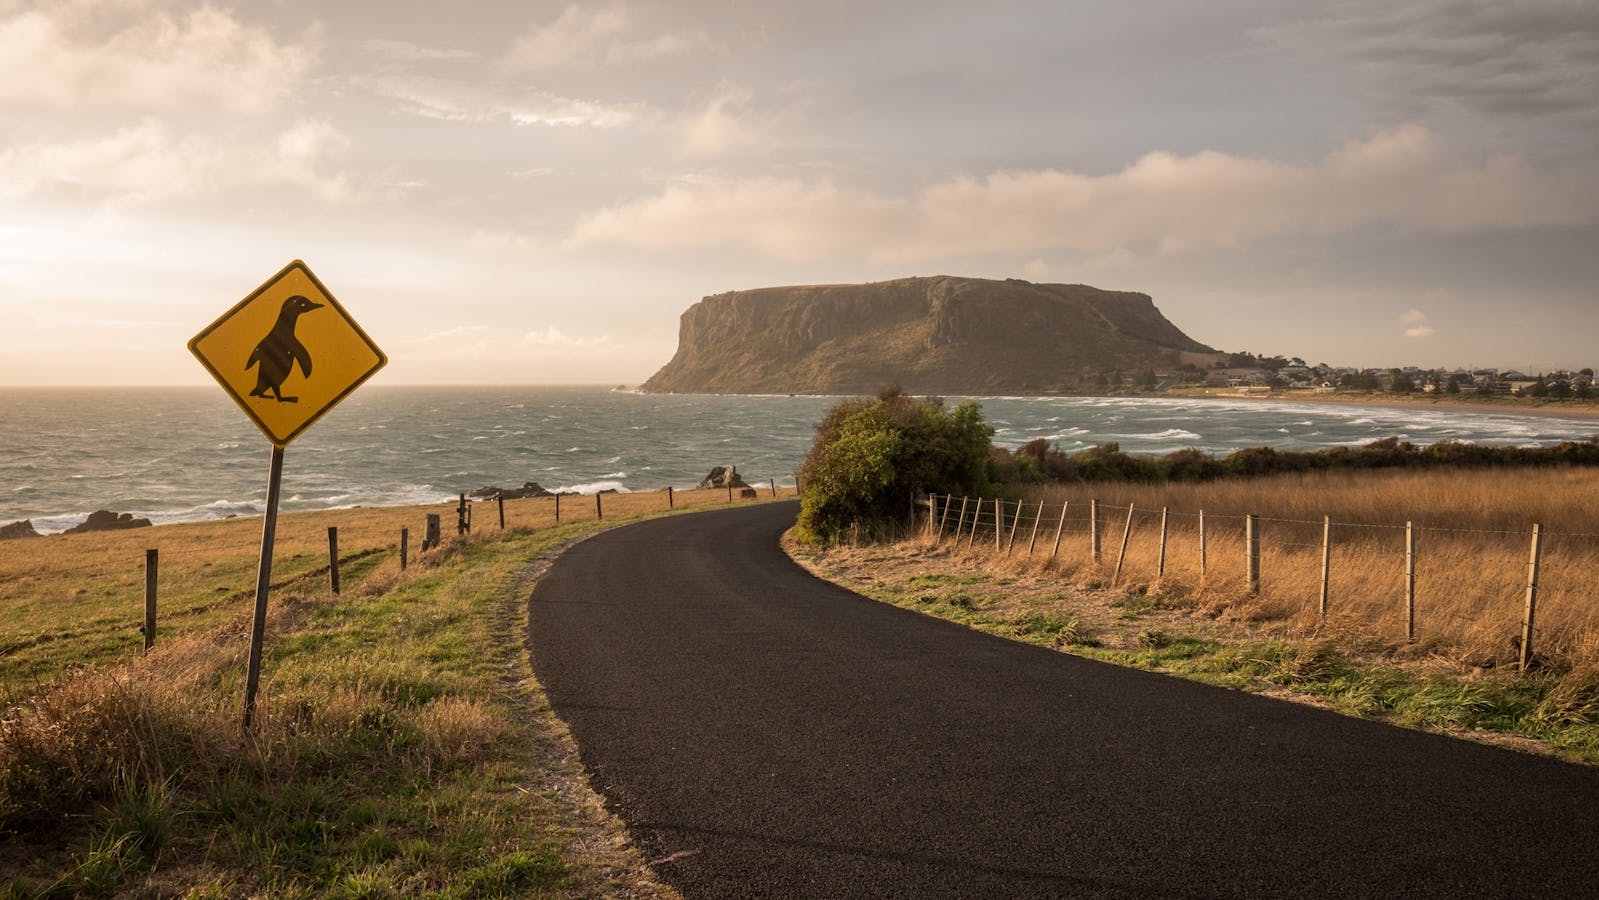 Rugged sea cliffs and glowing white-sand beaches - enjoy them all on a Lap of Tasmania road trip